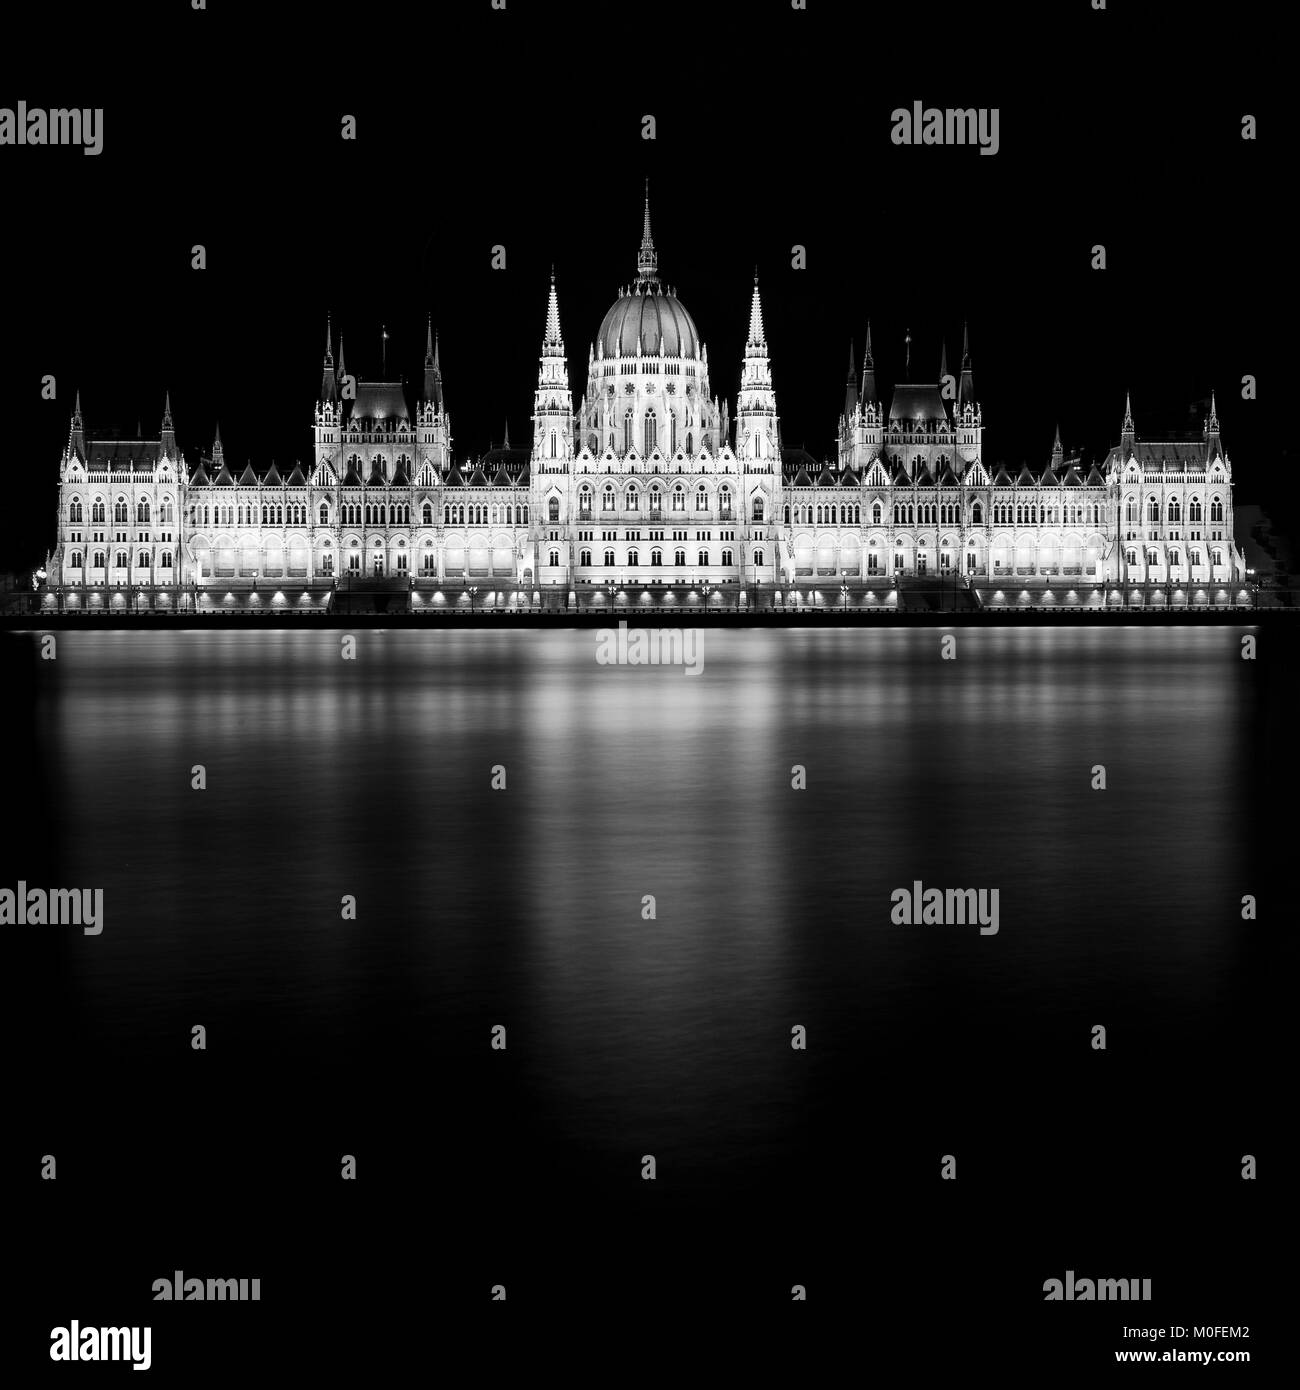 The Hungarian Parliament Building, Parliament of Budapest on the Danube (Donau) River at night Stock Photo